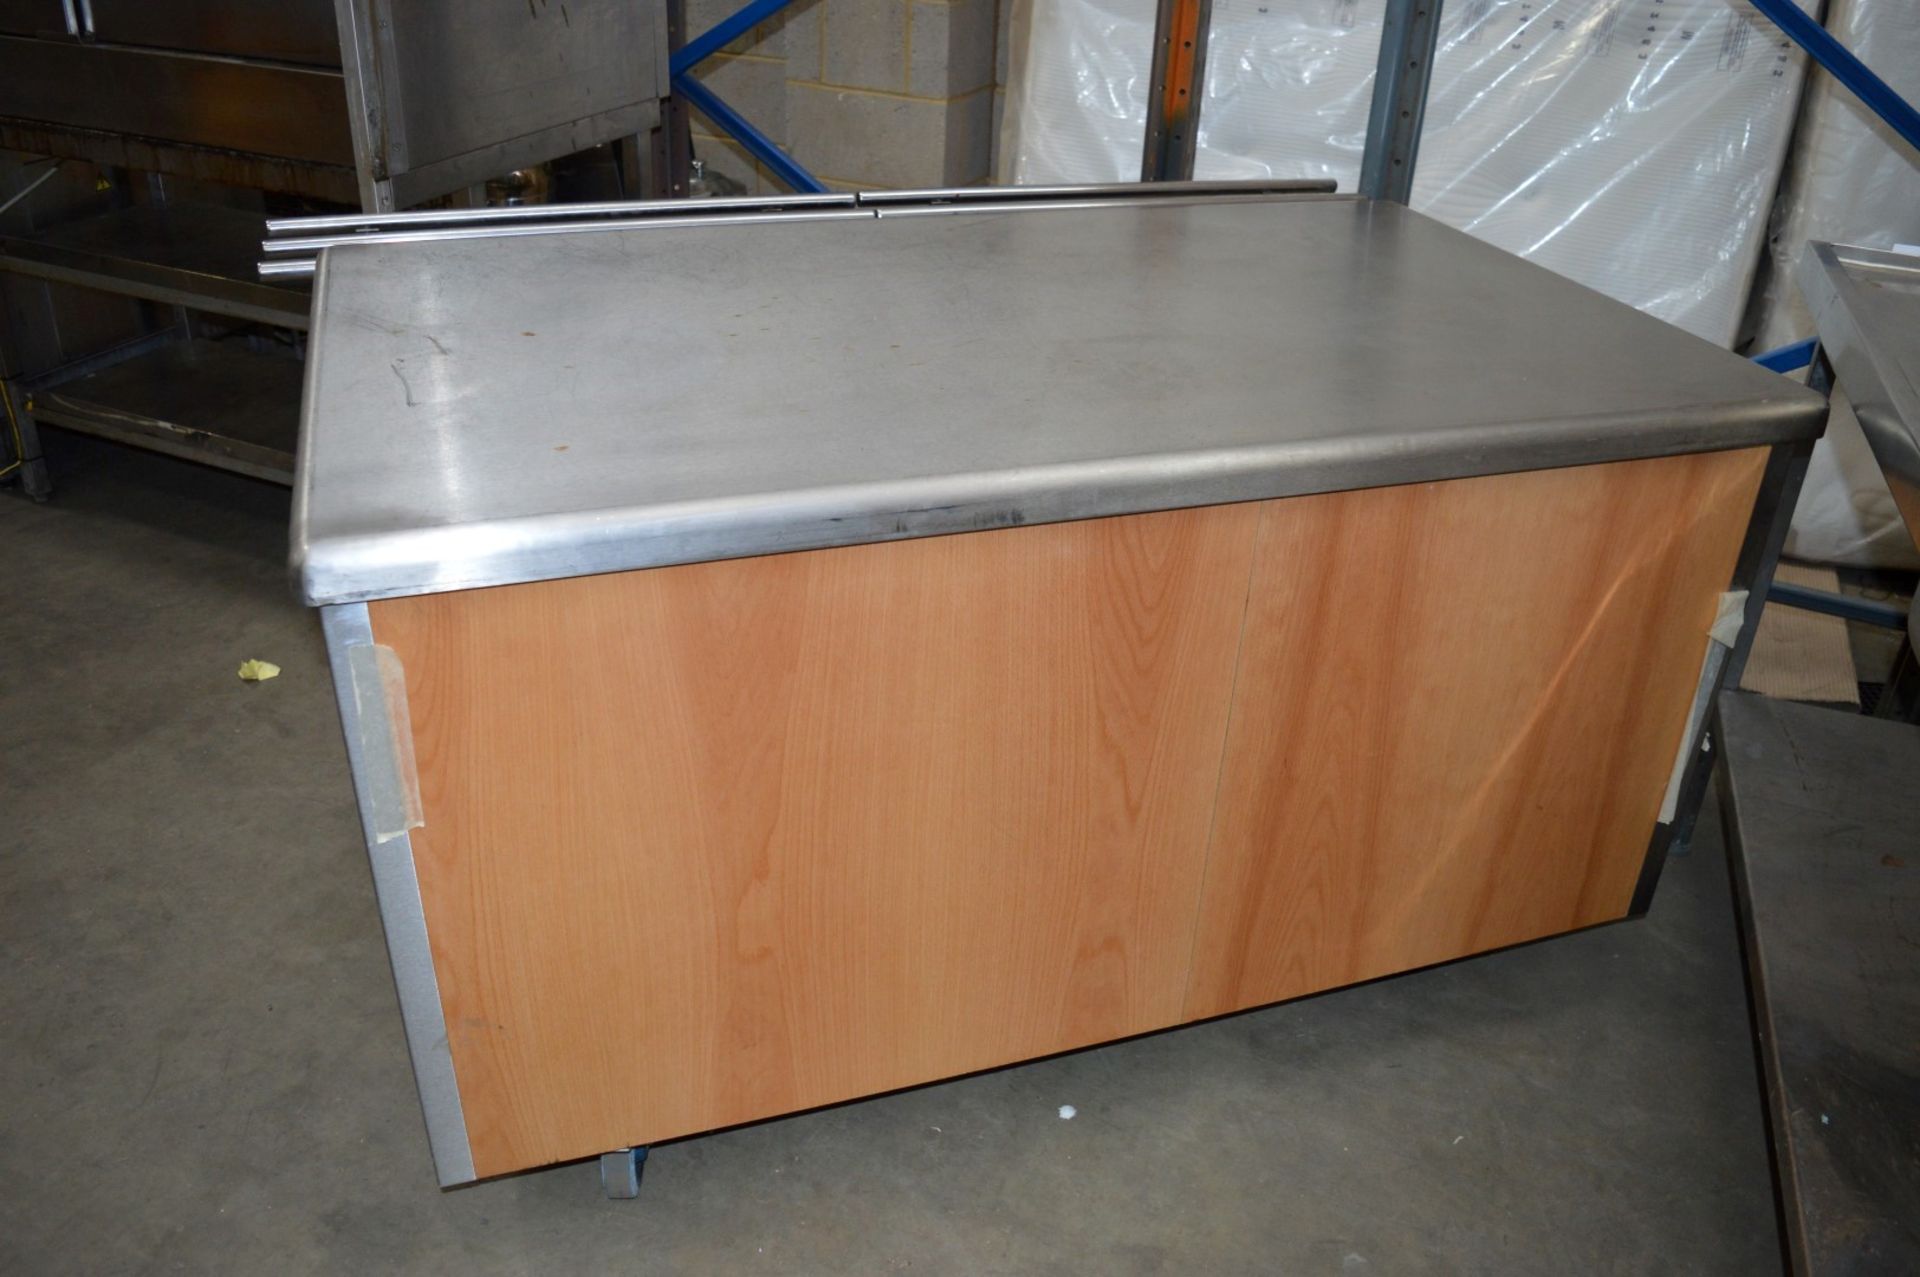 2 x Serving Counters - On Castors For Maneuverability - Ideal For Pub Carvery, Canteens, All You Can - Image 7 of 7